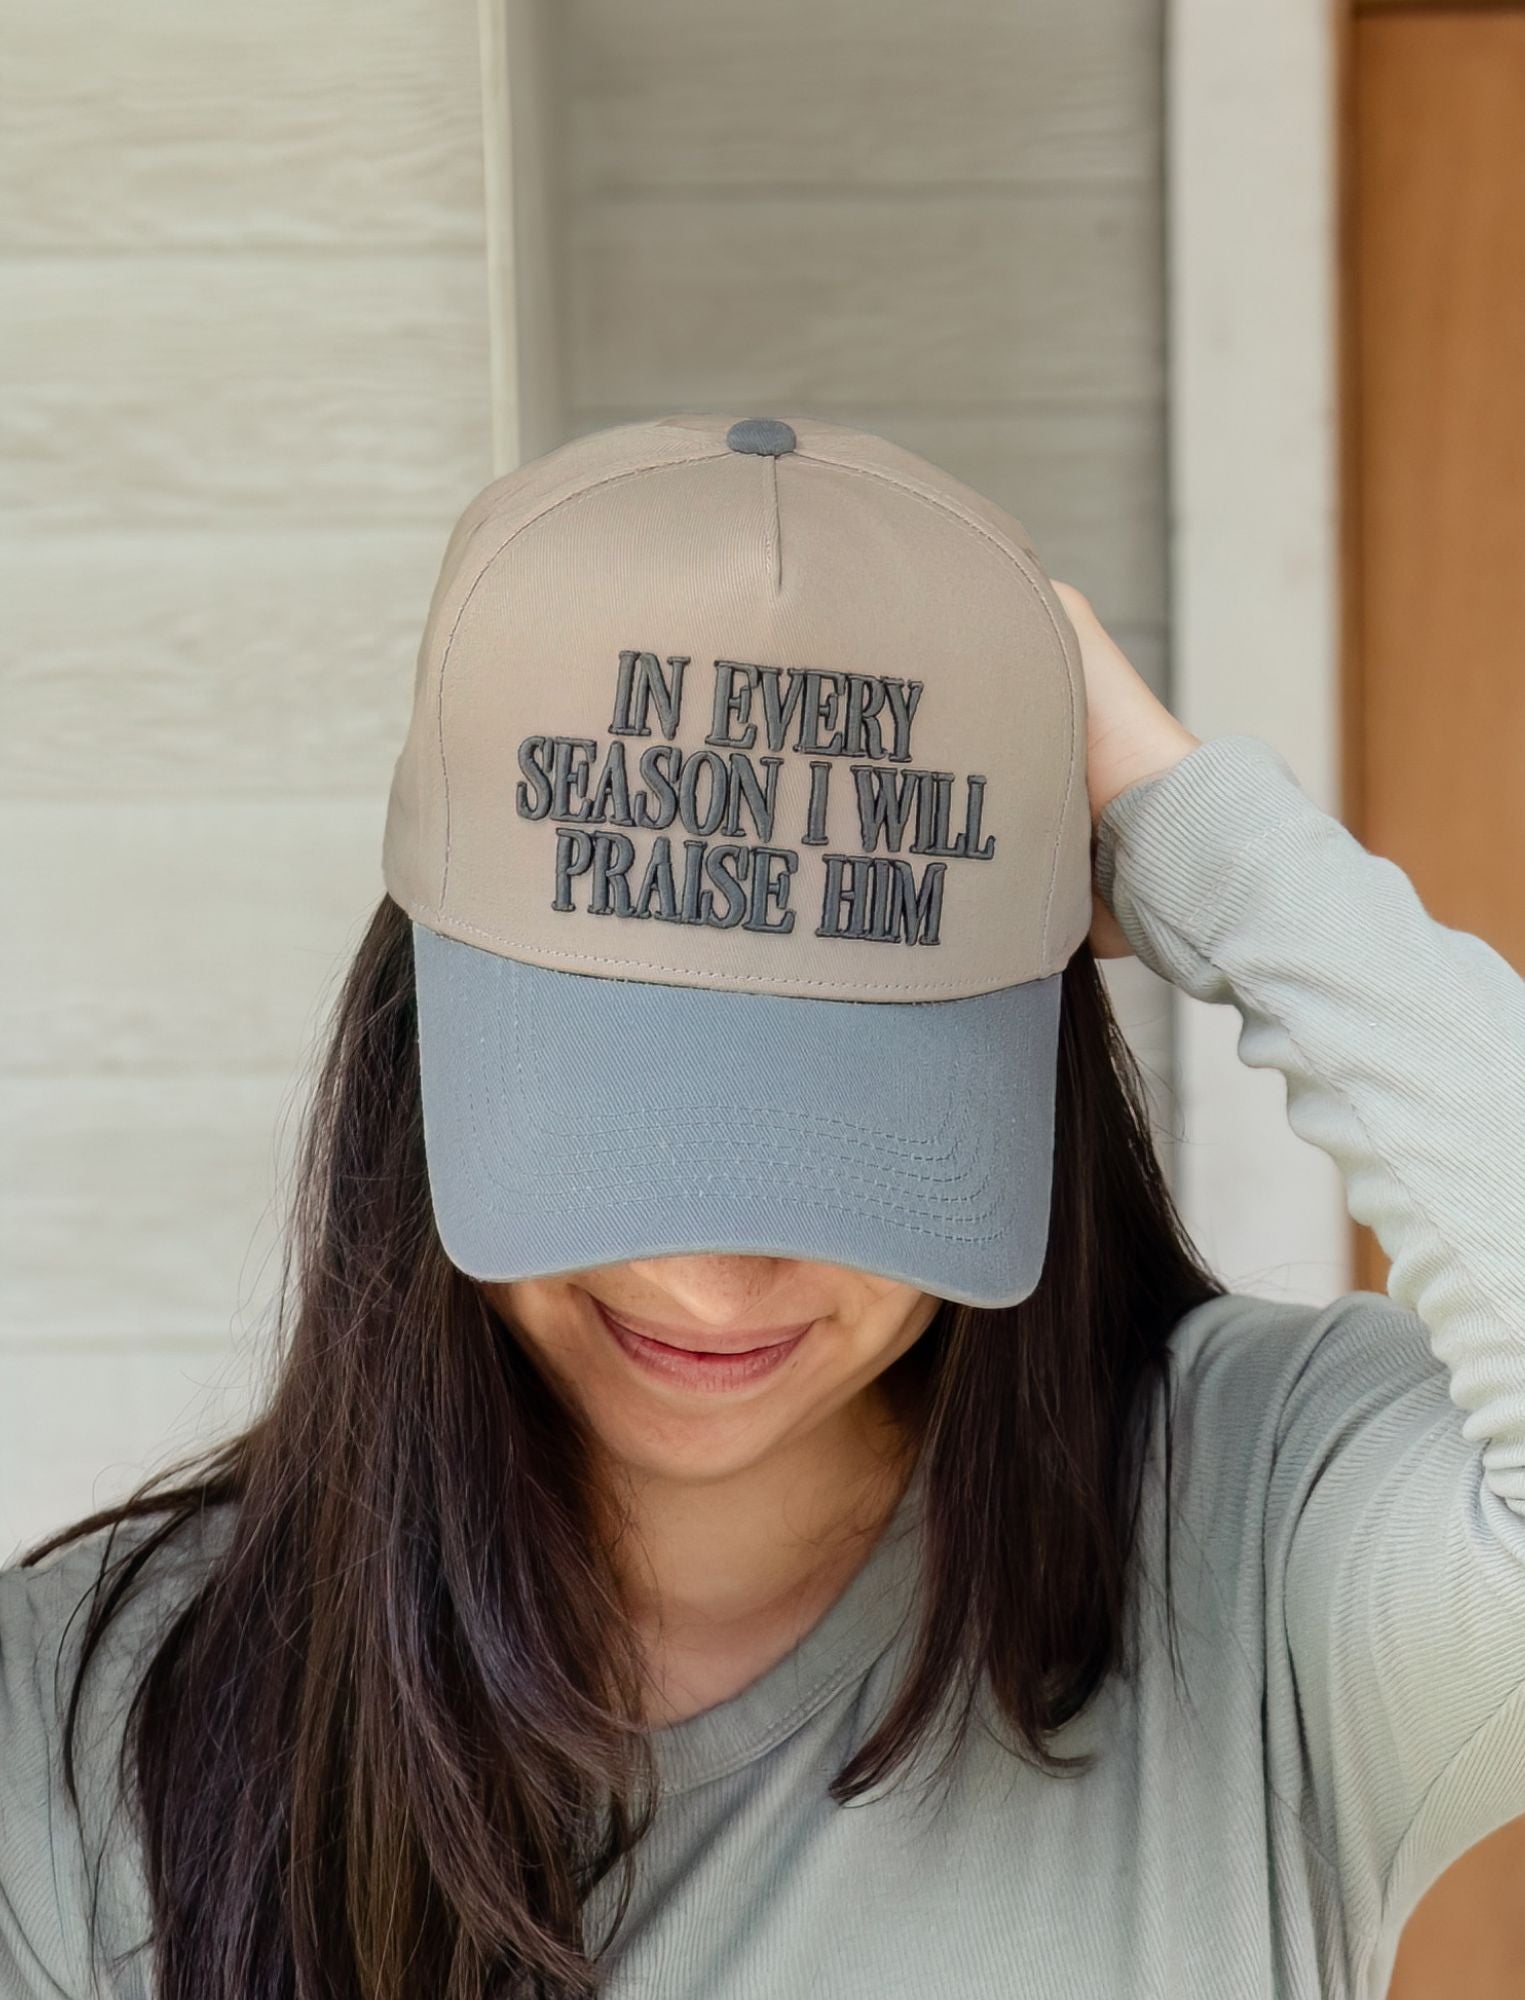 Hat: In every season I will praise Him